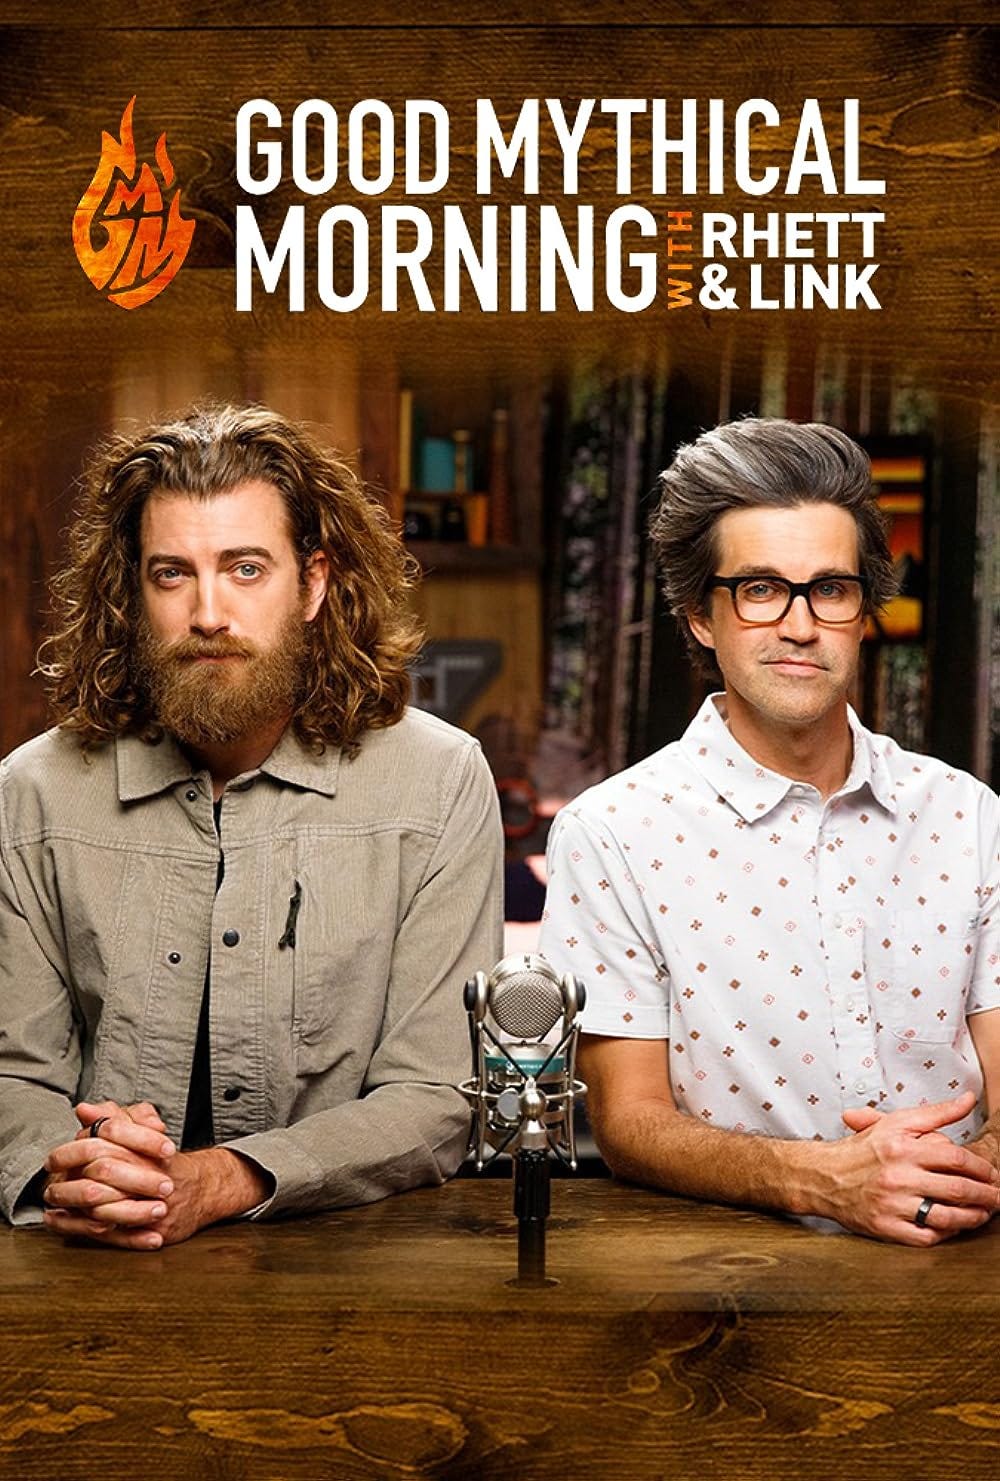 the logo for the youtube show good mythical morning with rhett and link. two white guys in their forties are staring at the camera. one has curly long brown hair and a beard, the other has graying black hair and glasses. they are sitting at a desk. 